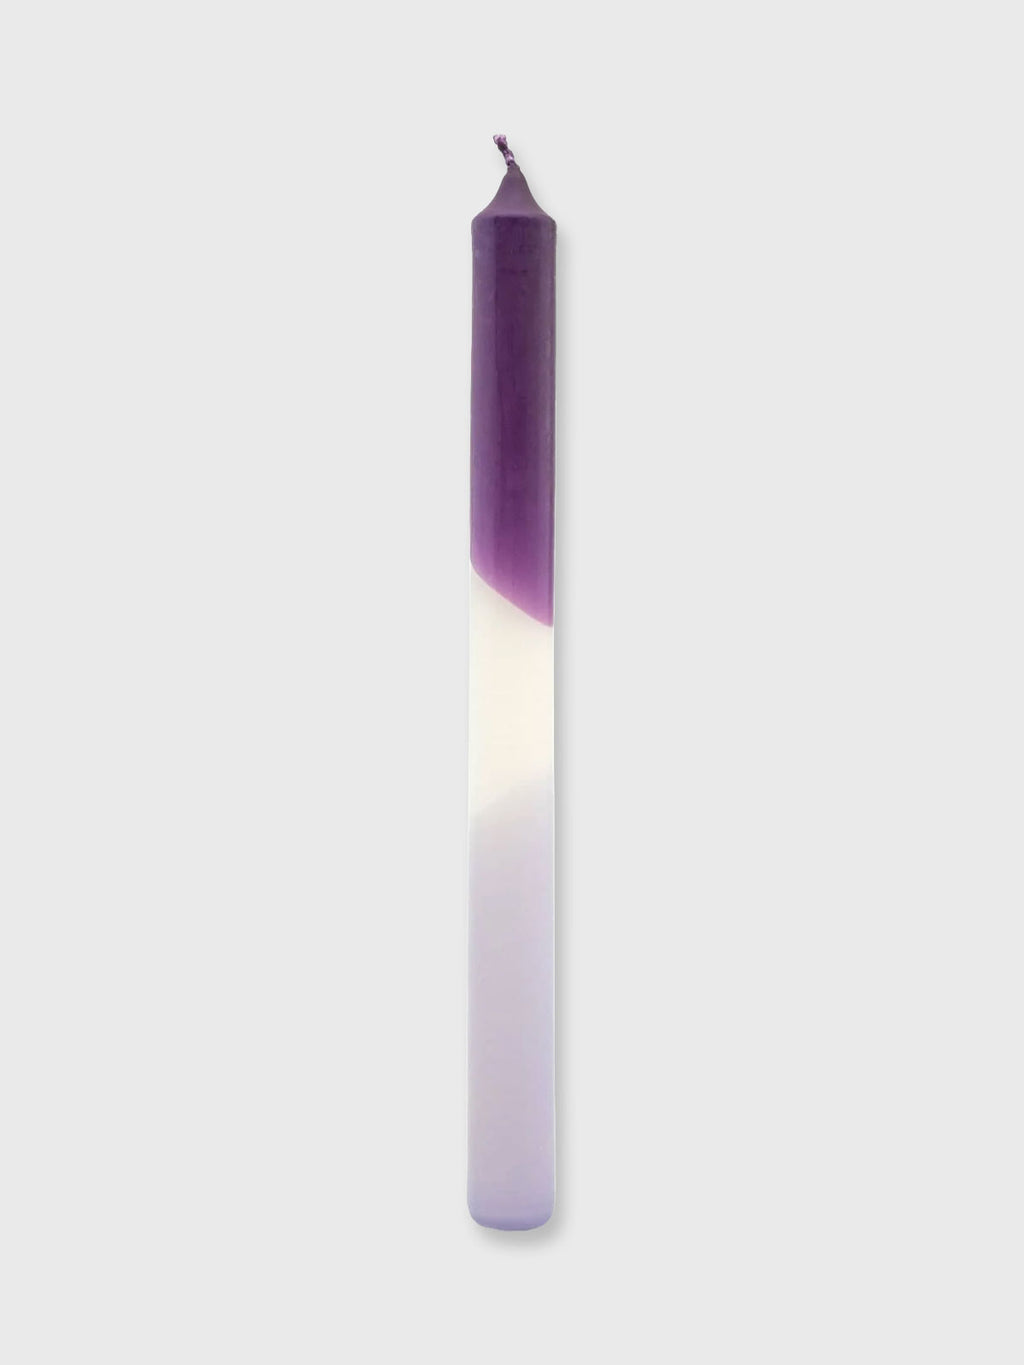 Two Tone Dinner Candle - Purple